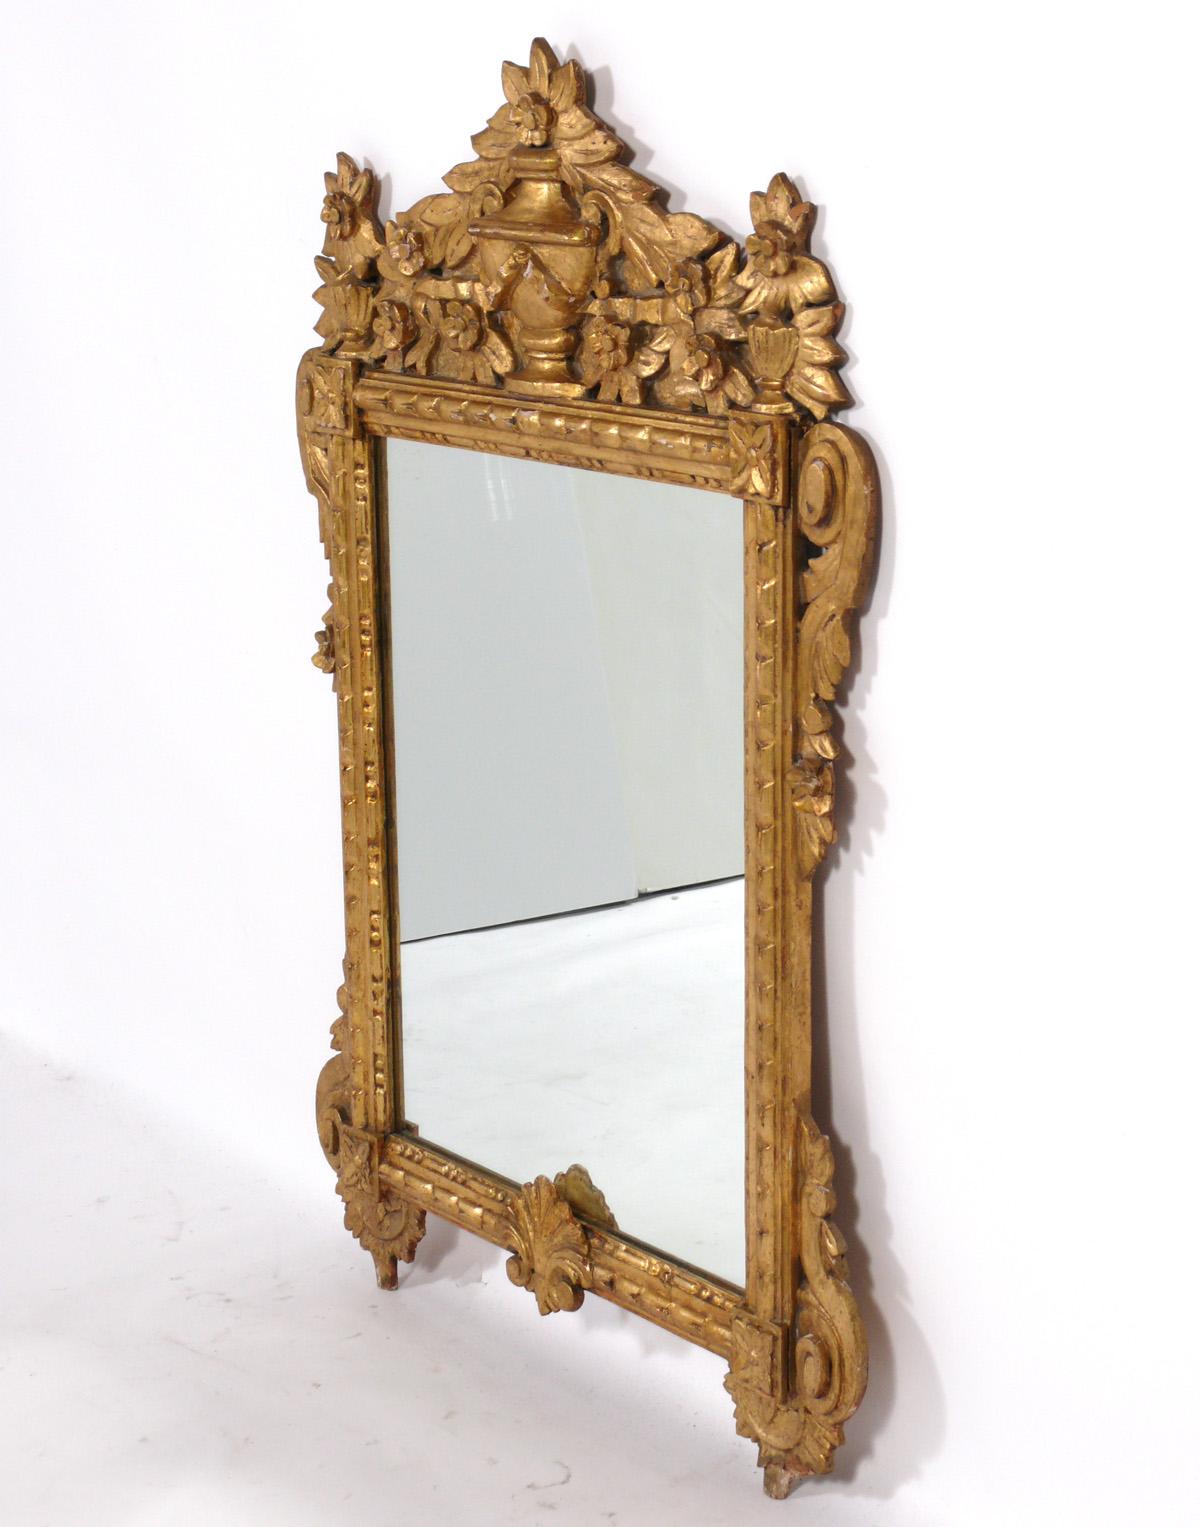 Italian Gilt Wood mirror, Italy, circa 1950s. This mirror was recently removed from the legendary Carlyle Hotel in NYC. It measures an impressive 47.75